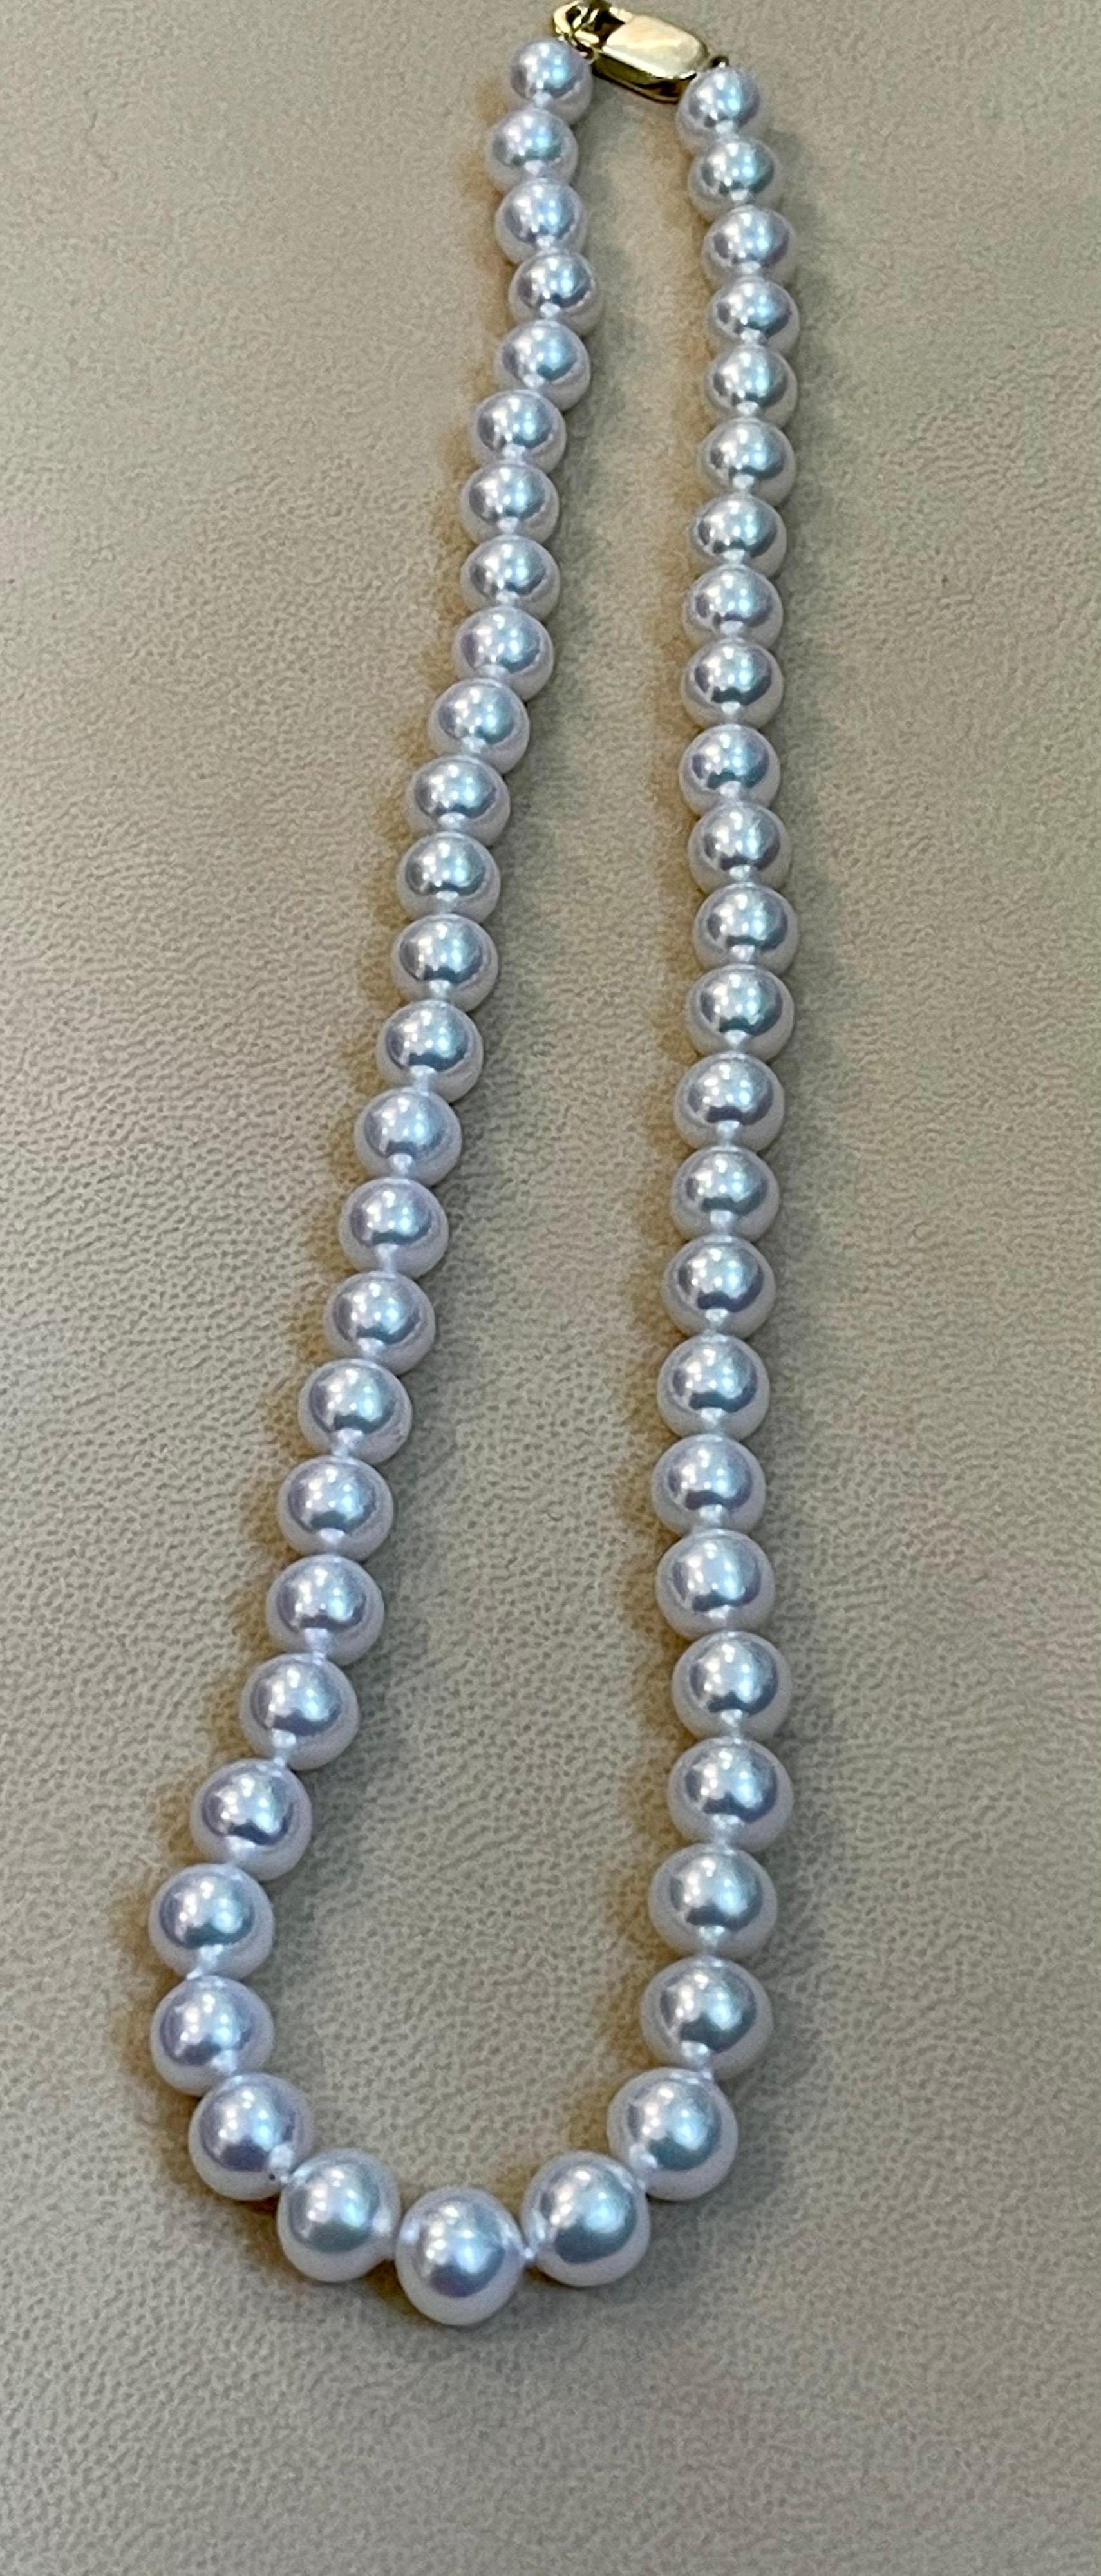 Round Cut 50 Round Akoya Pearls Strand Necklace Set in 14 Karat Gold Clasp For Sale